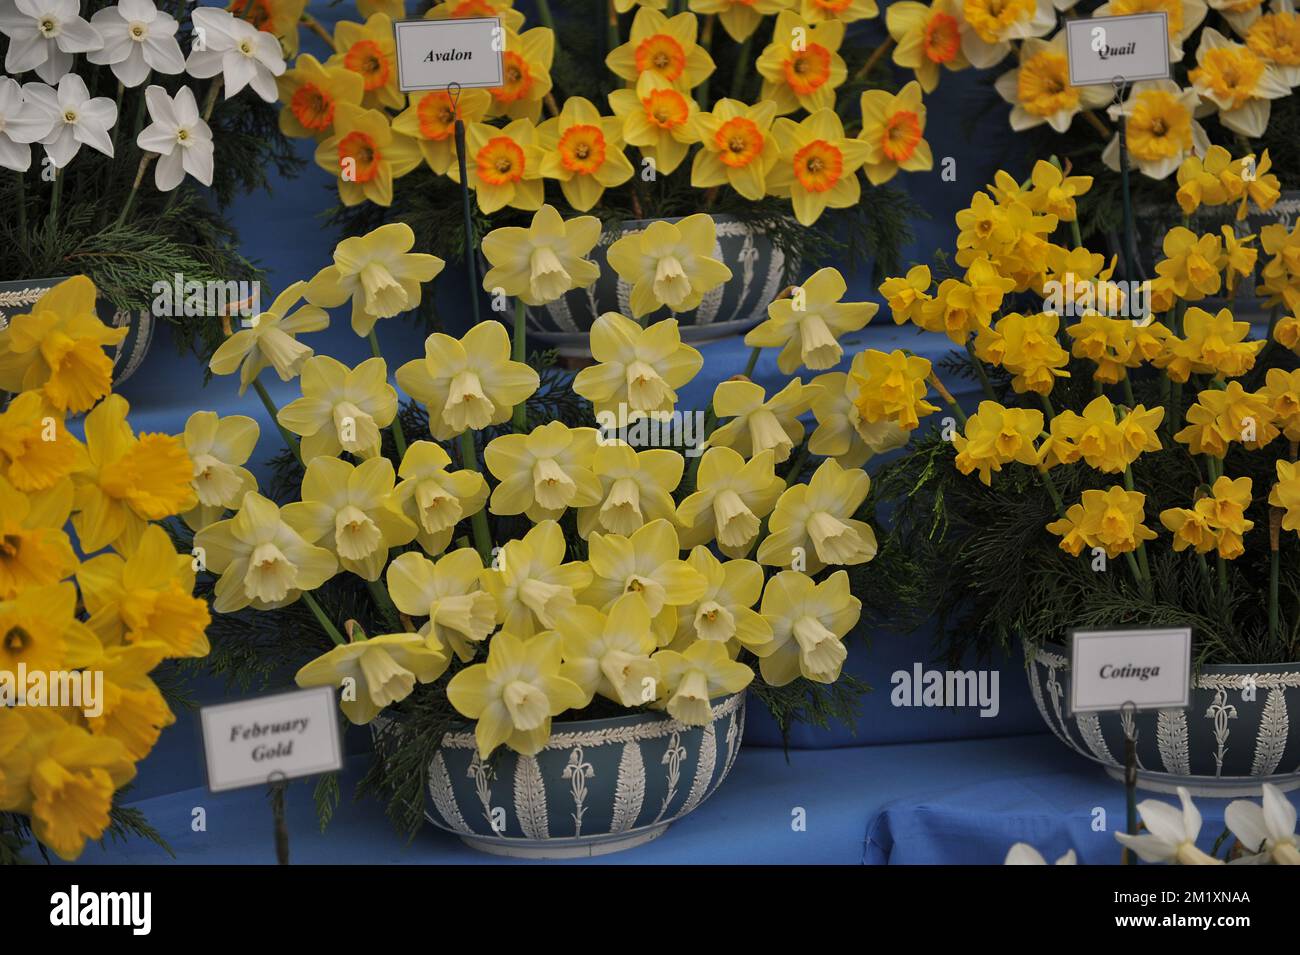 A bouquet of pale yellow with white cups Large-Cupped daffodils (Narcissus) Avalon on an exhibition in May Stock Photo